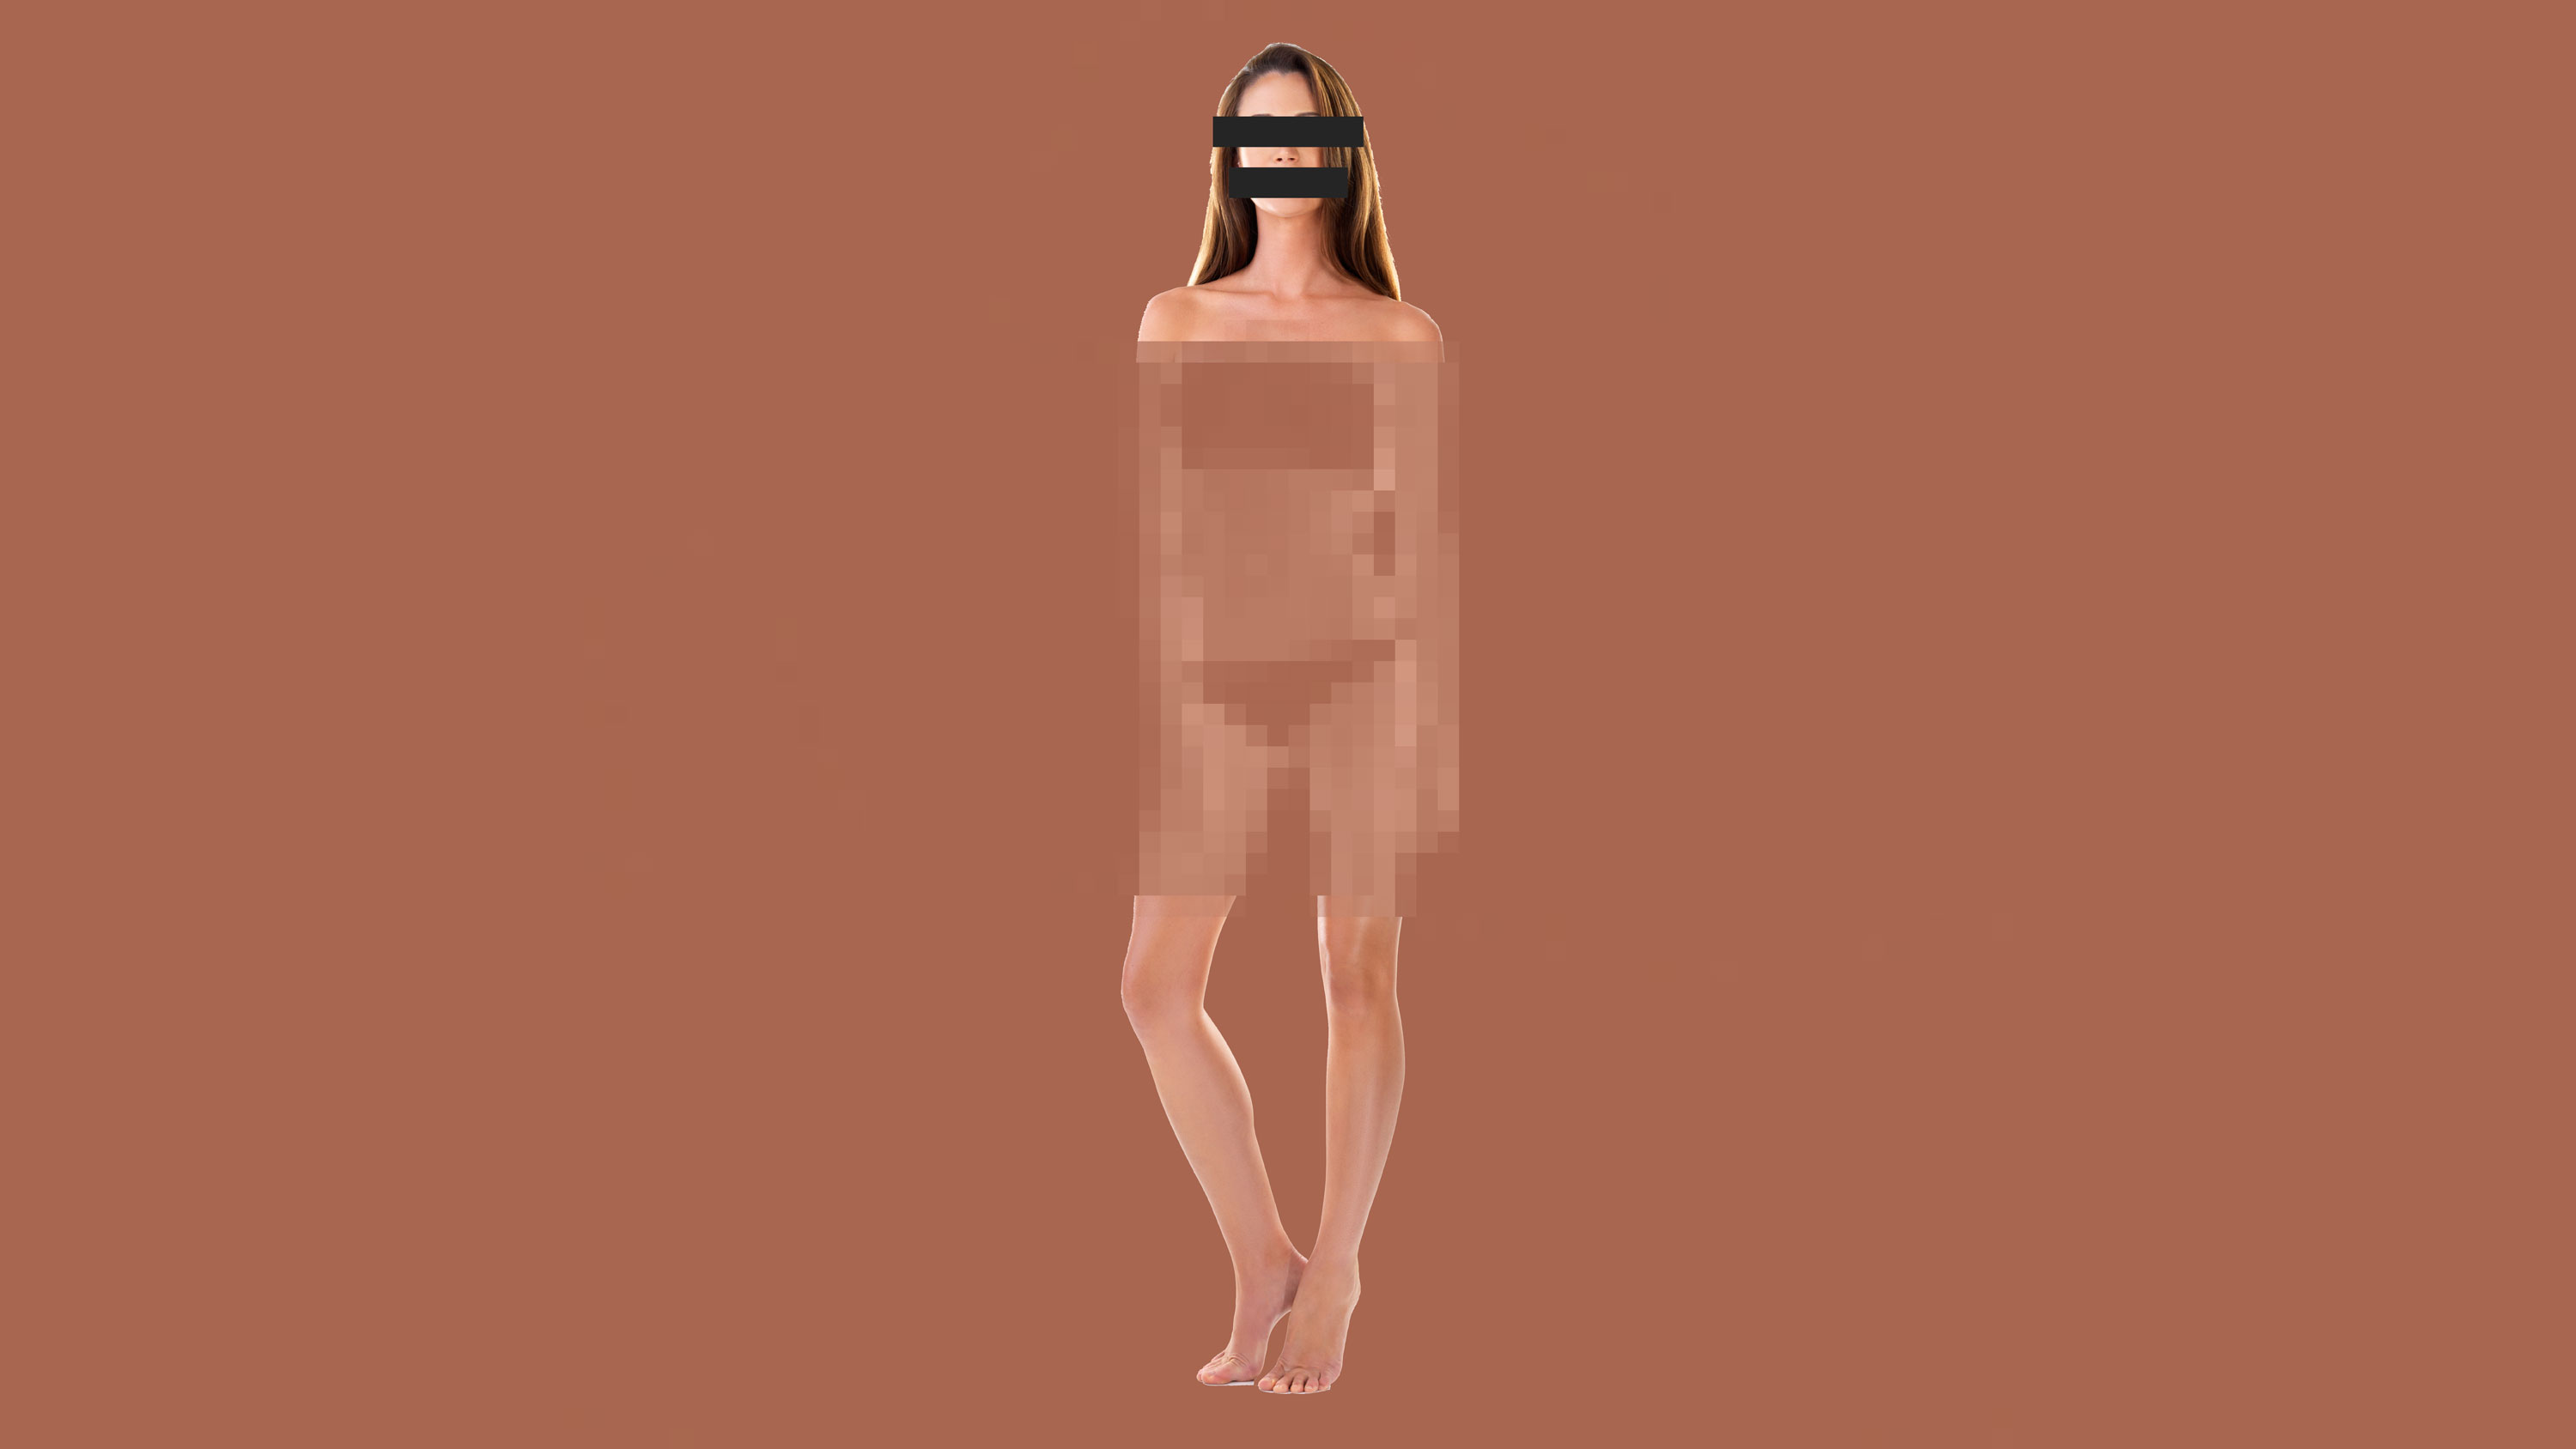 An image of a woman with her body blurred